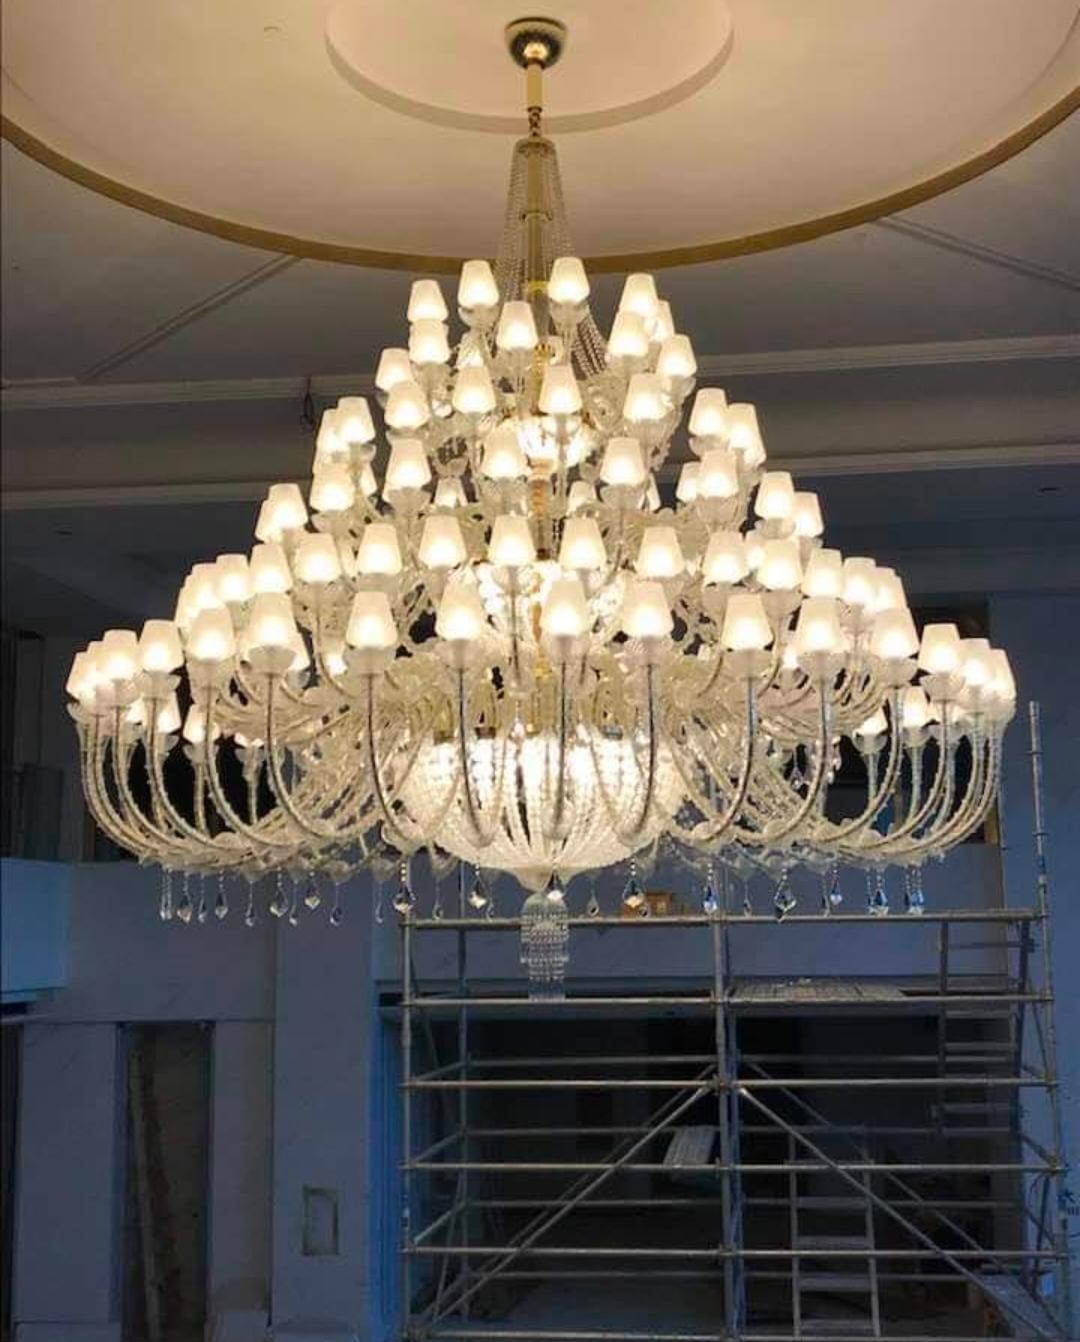 Italian Murano Glass Chandelier in Style of 19th Century Available
Majestic Murano glass chandelier. Made of blown glass, each individual component reflects the craftsmanship of Venetian master glassmakers, famous for their precision and